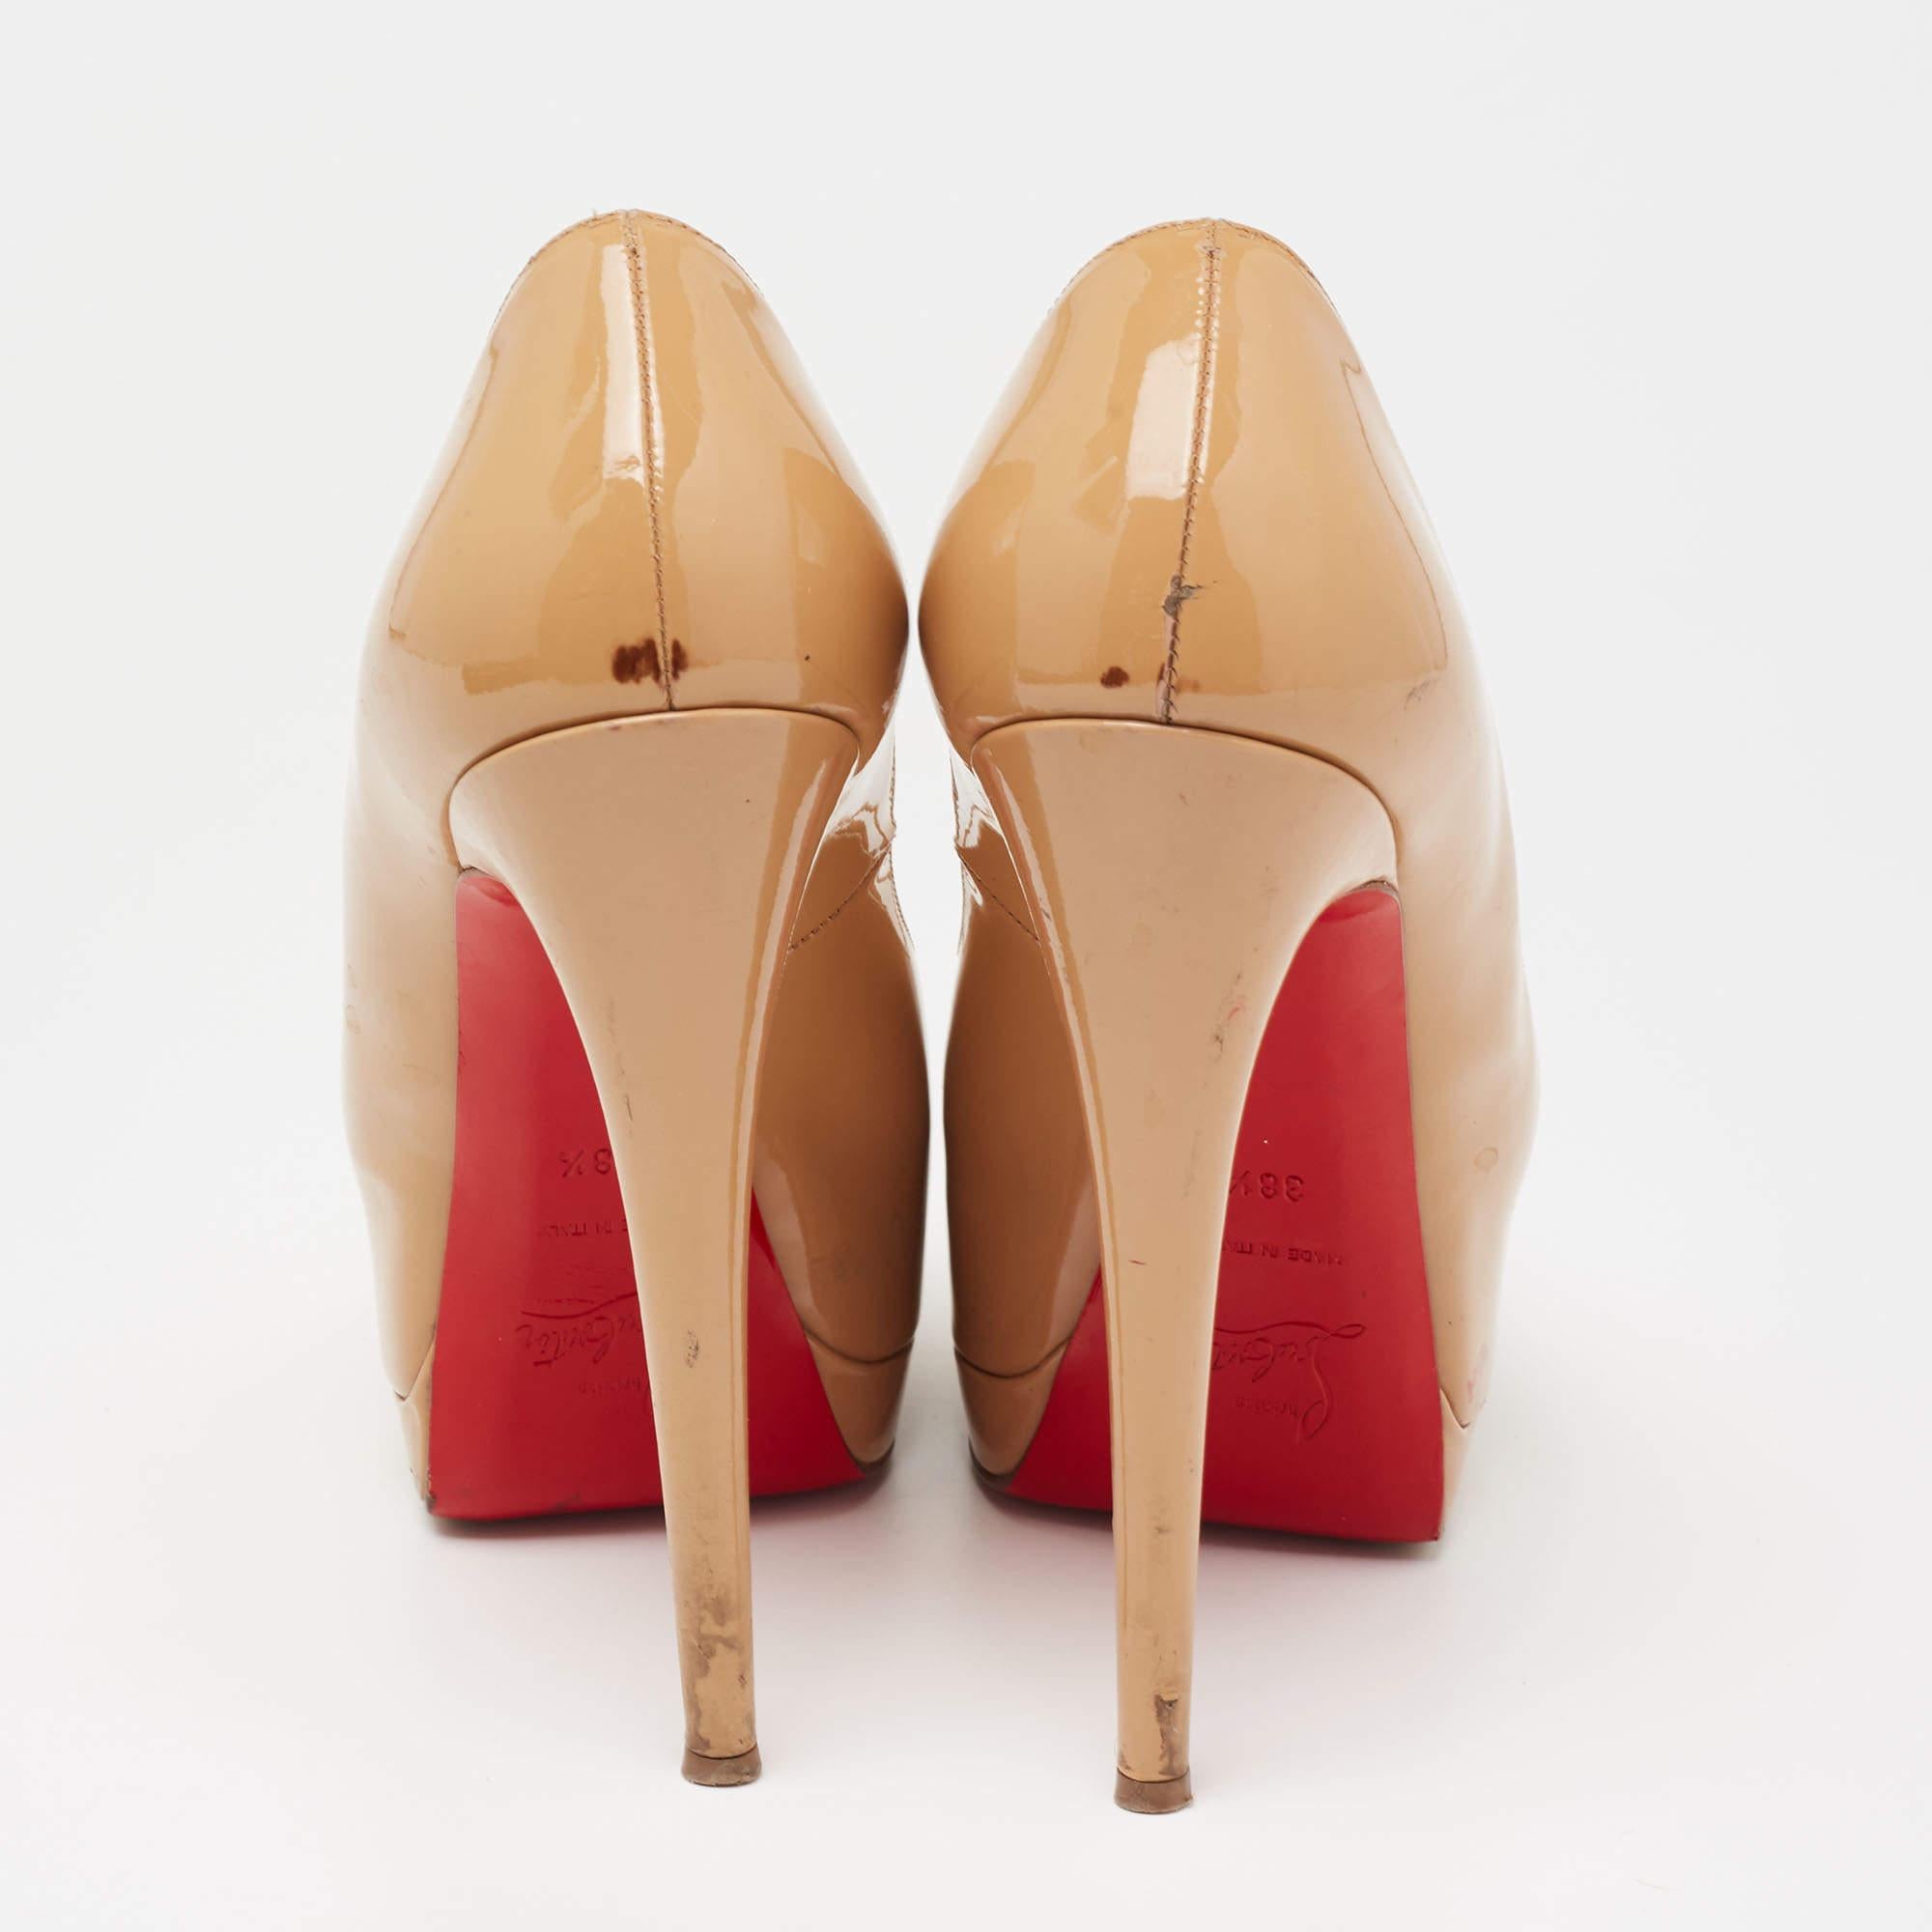 Christian Louboutin Beige Patent Leather New Prive Platform Pumps Size 38.5 For Sale 1